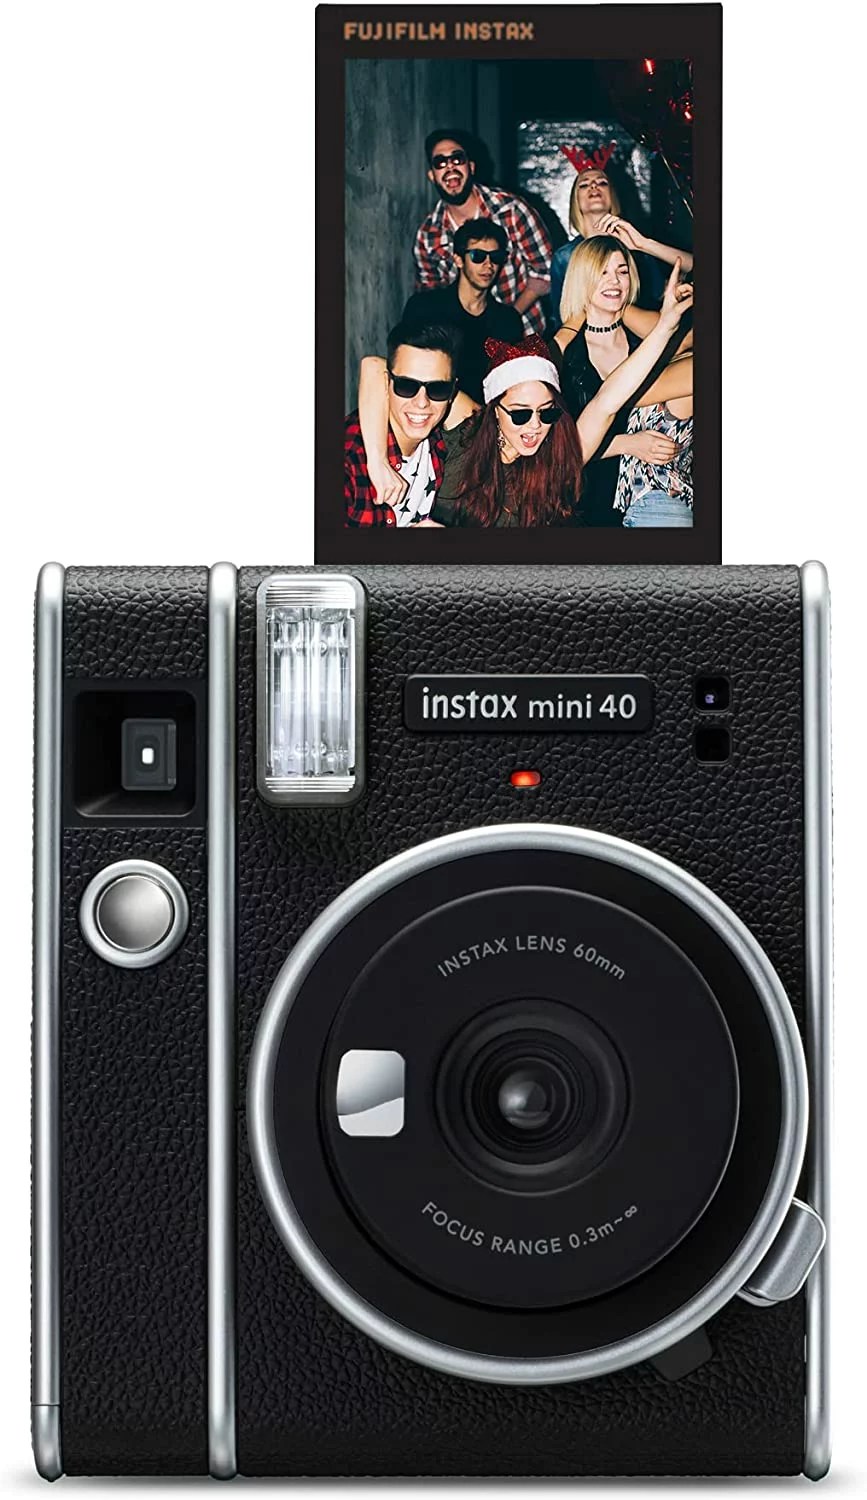 fuji film instax camera, one of the best valentine's day gifts for couples, on a white background